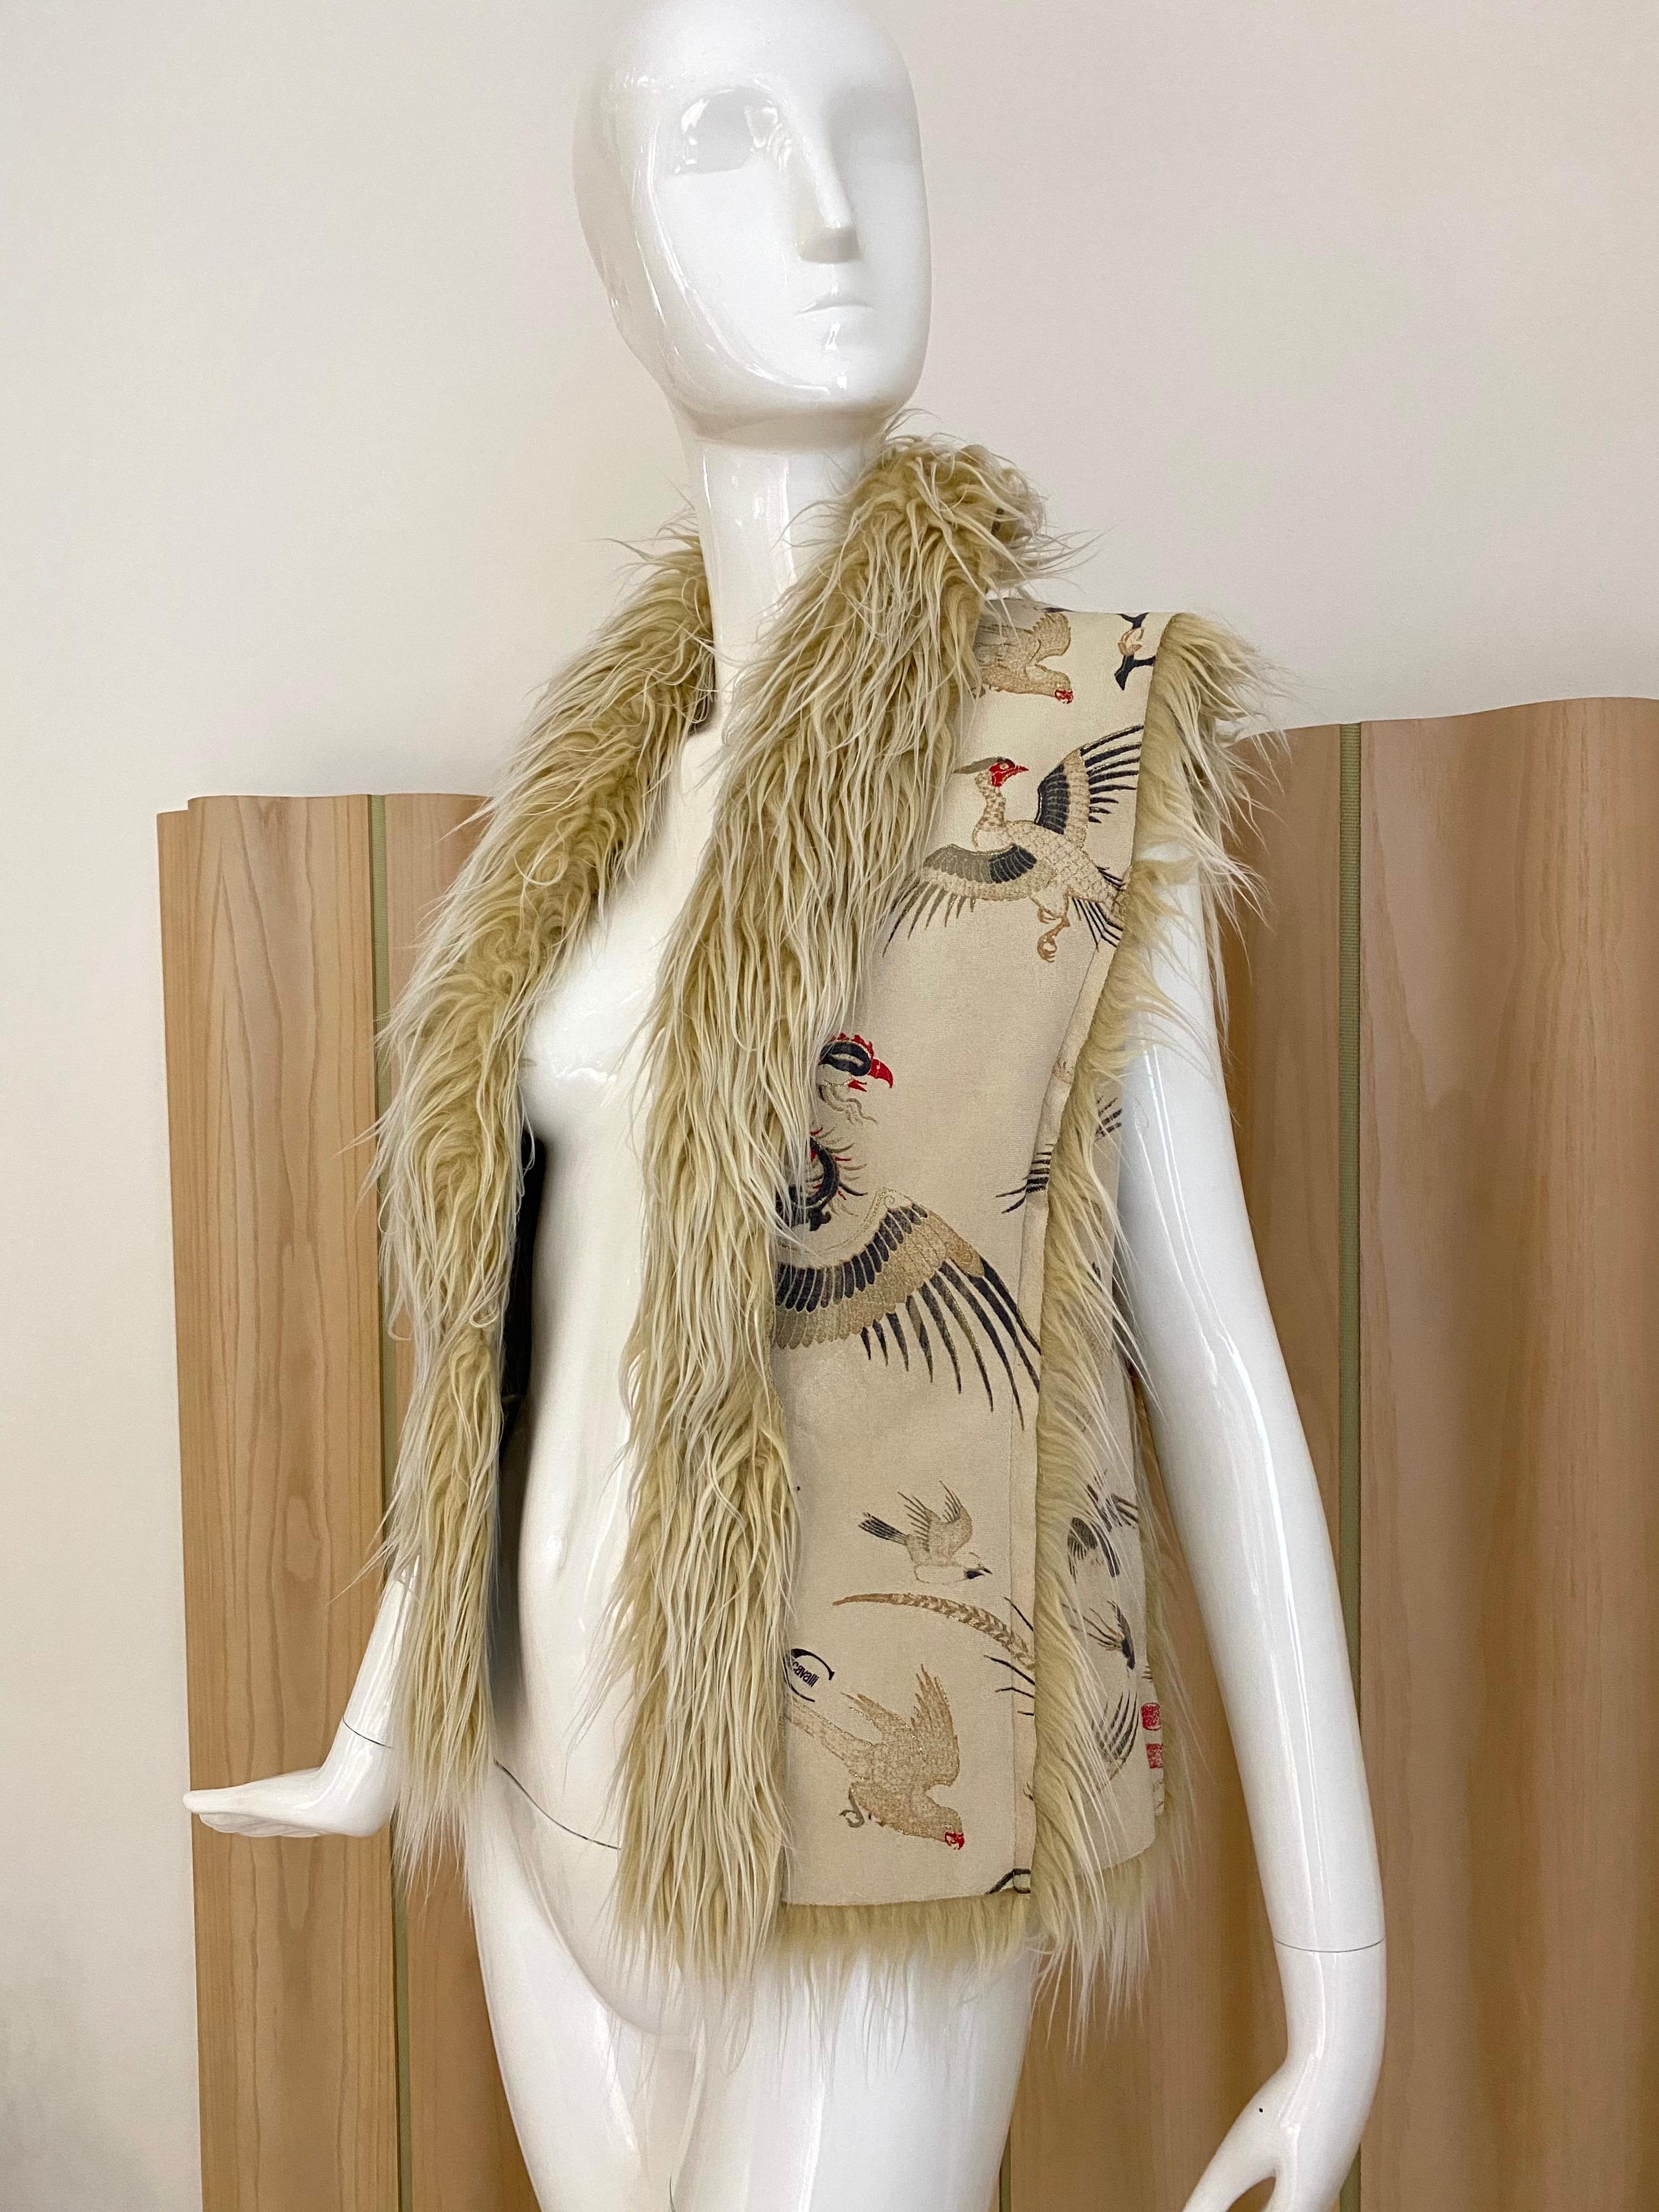 Roberto cavalli embroidered  suede vest with faux fur. Very chic.
marked IT size 42 . fit size 4/6 
Bust : 34-36 “
Excellent condition 